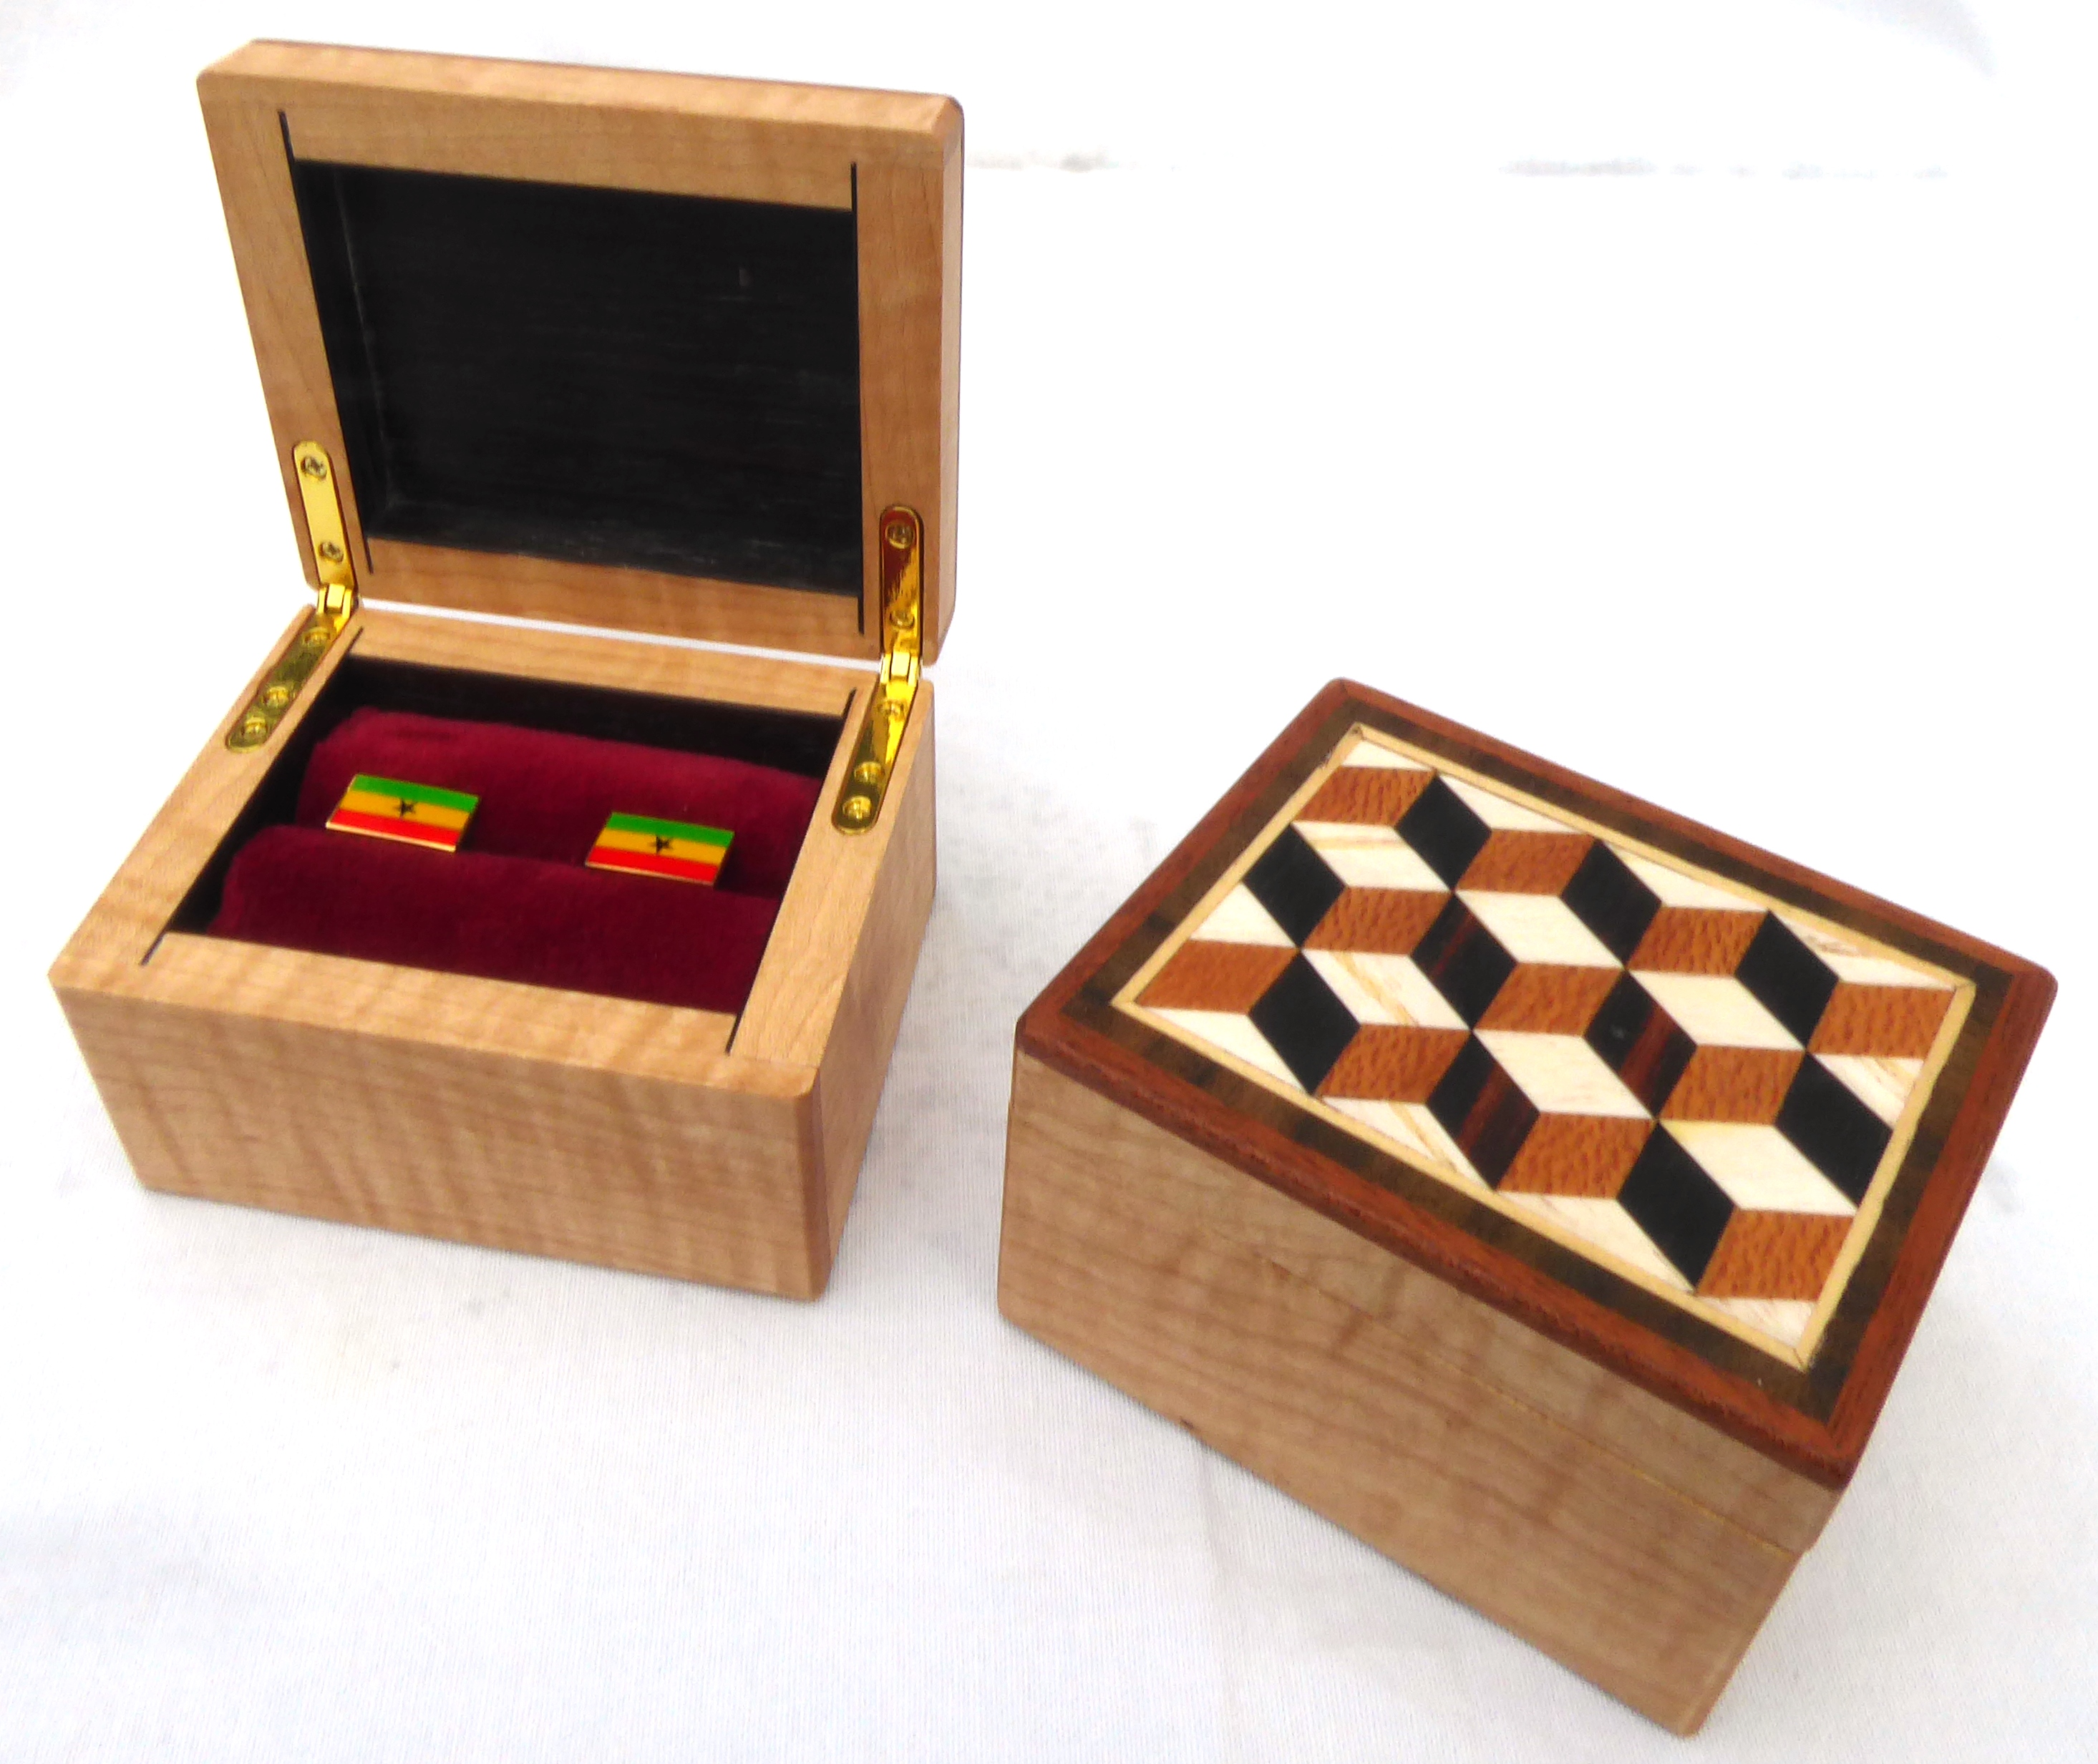 Pair Of Boxes 1455 - Click for details